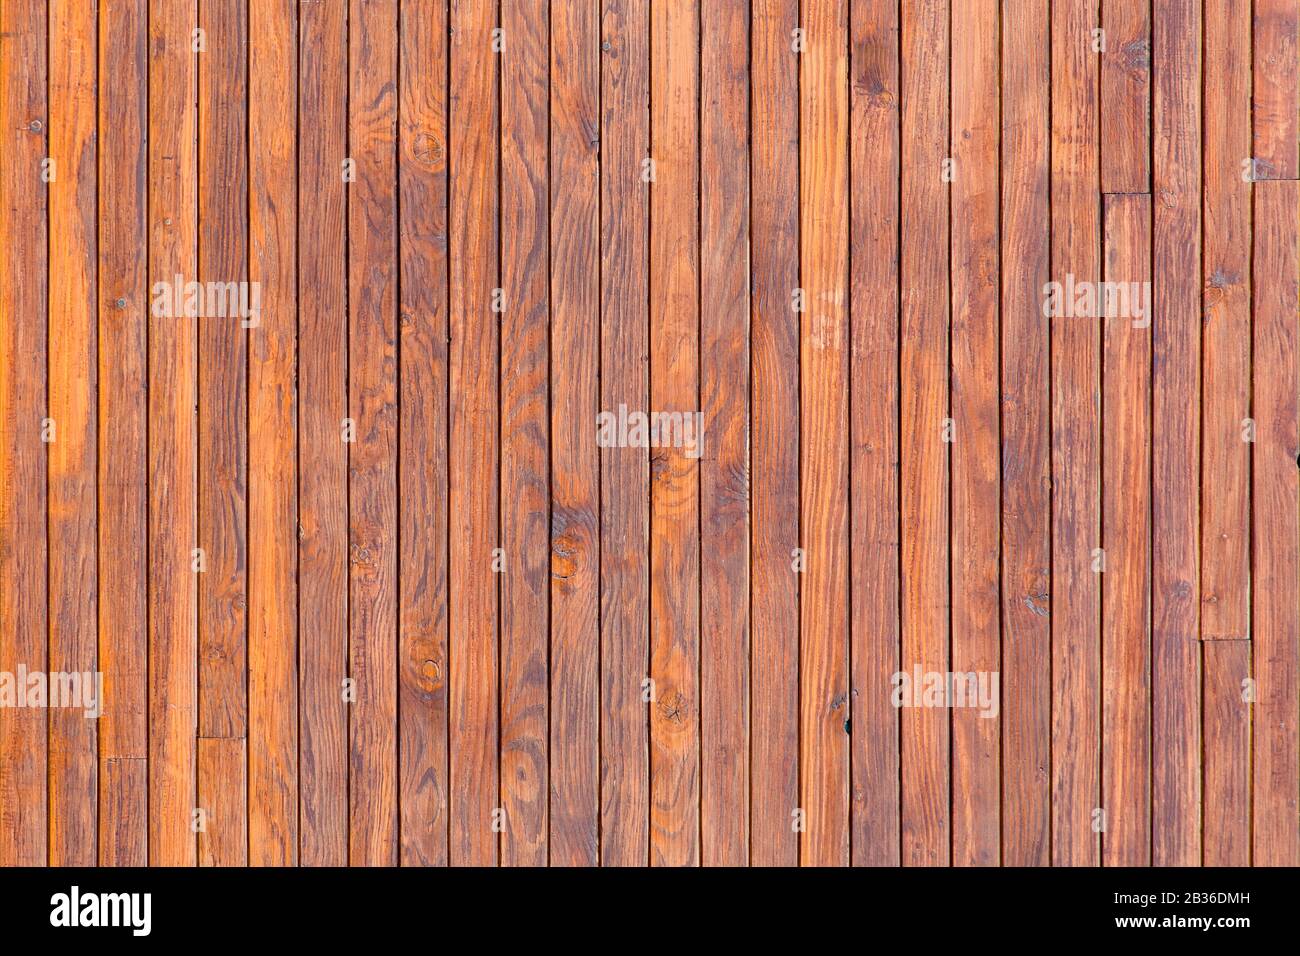 A grunge wood pattern texture background, wooden planks in vertical position Stock Photo